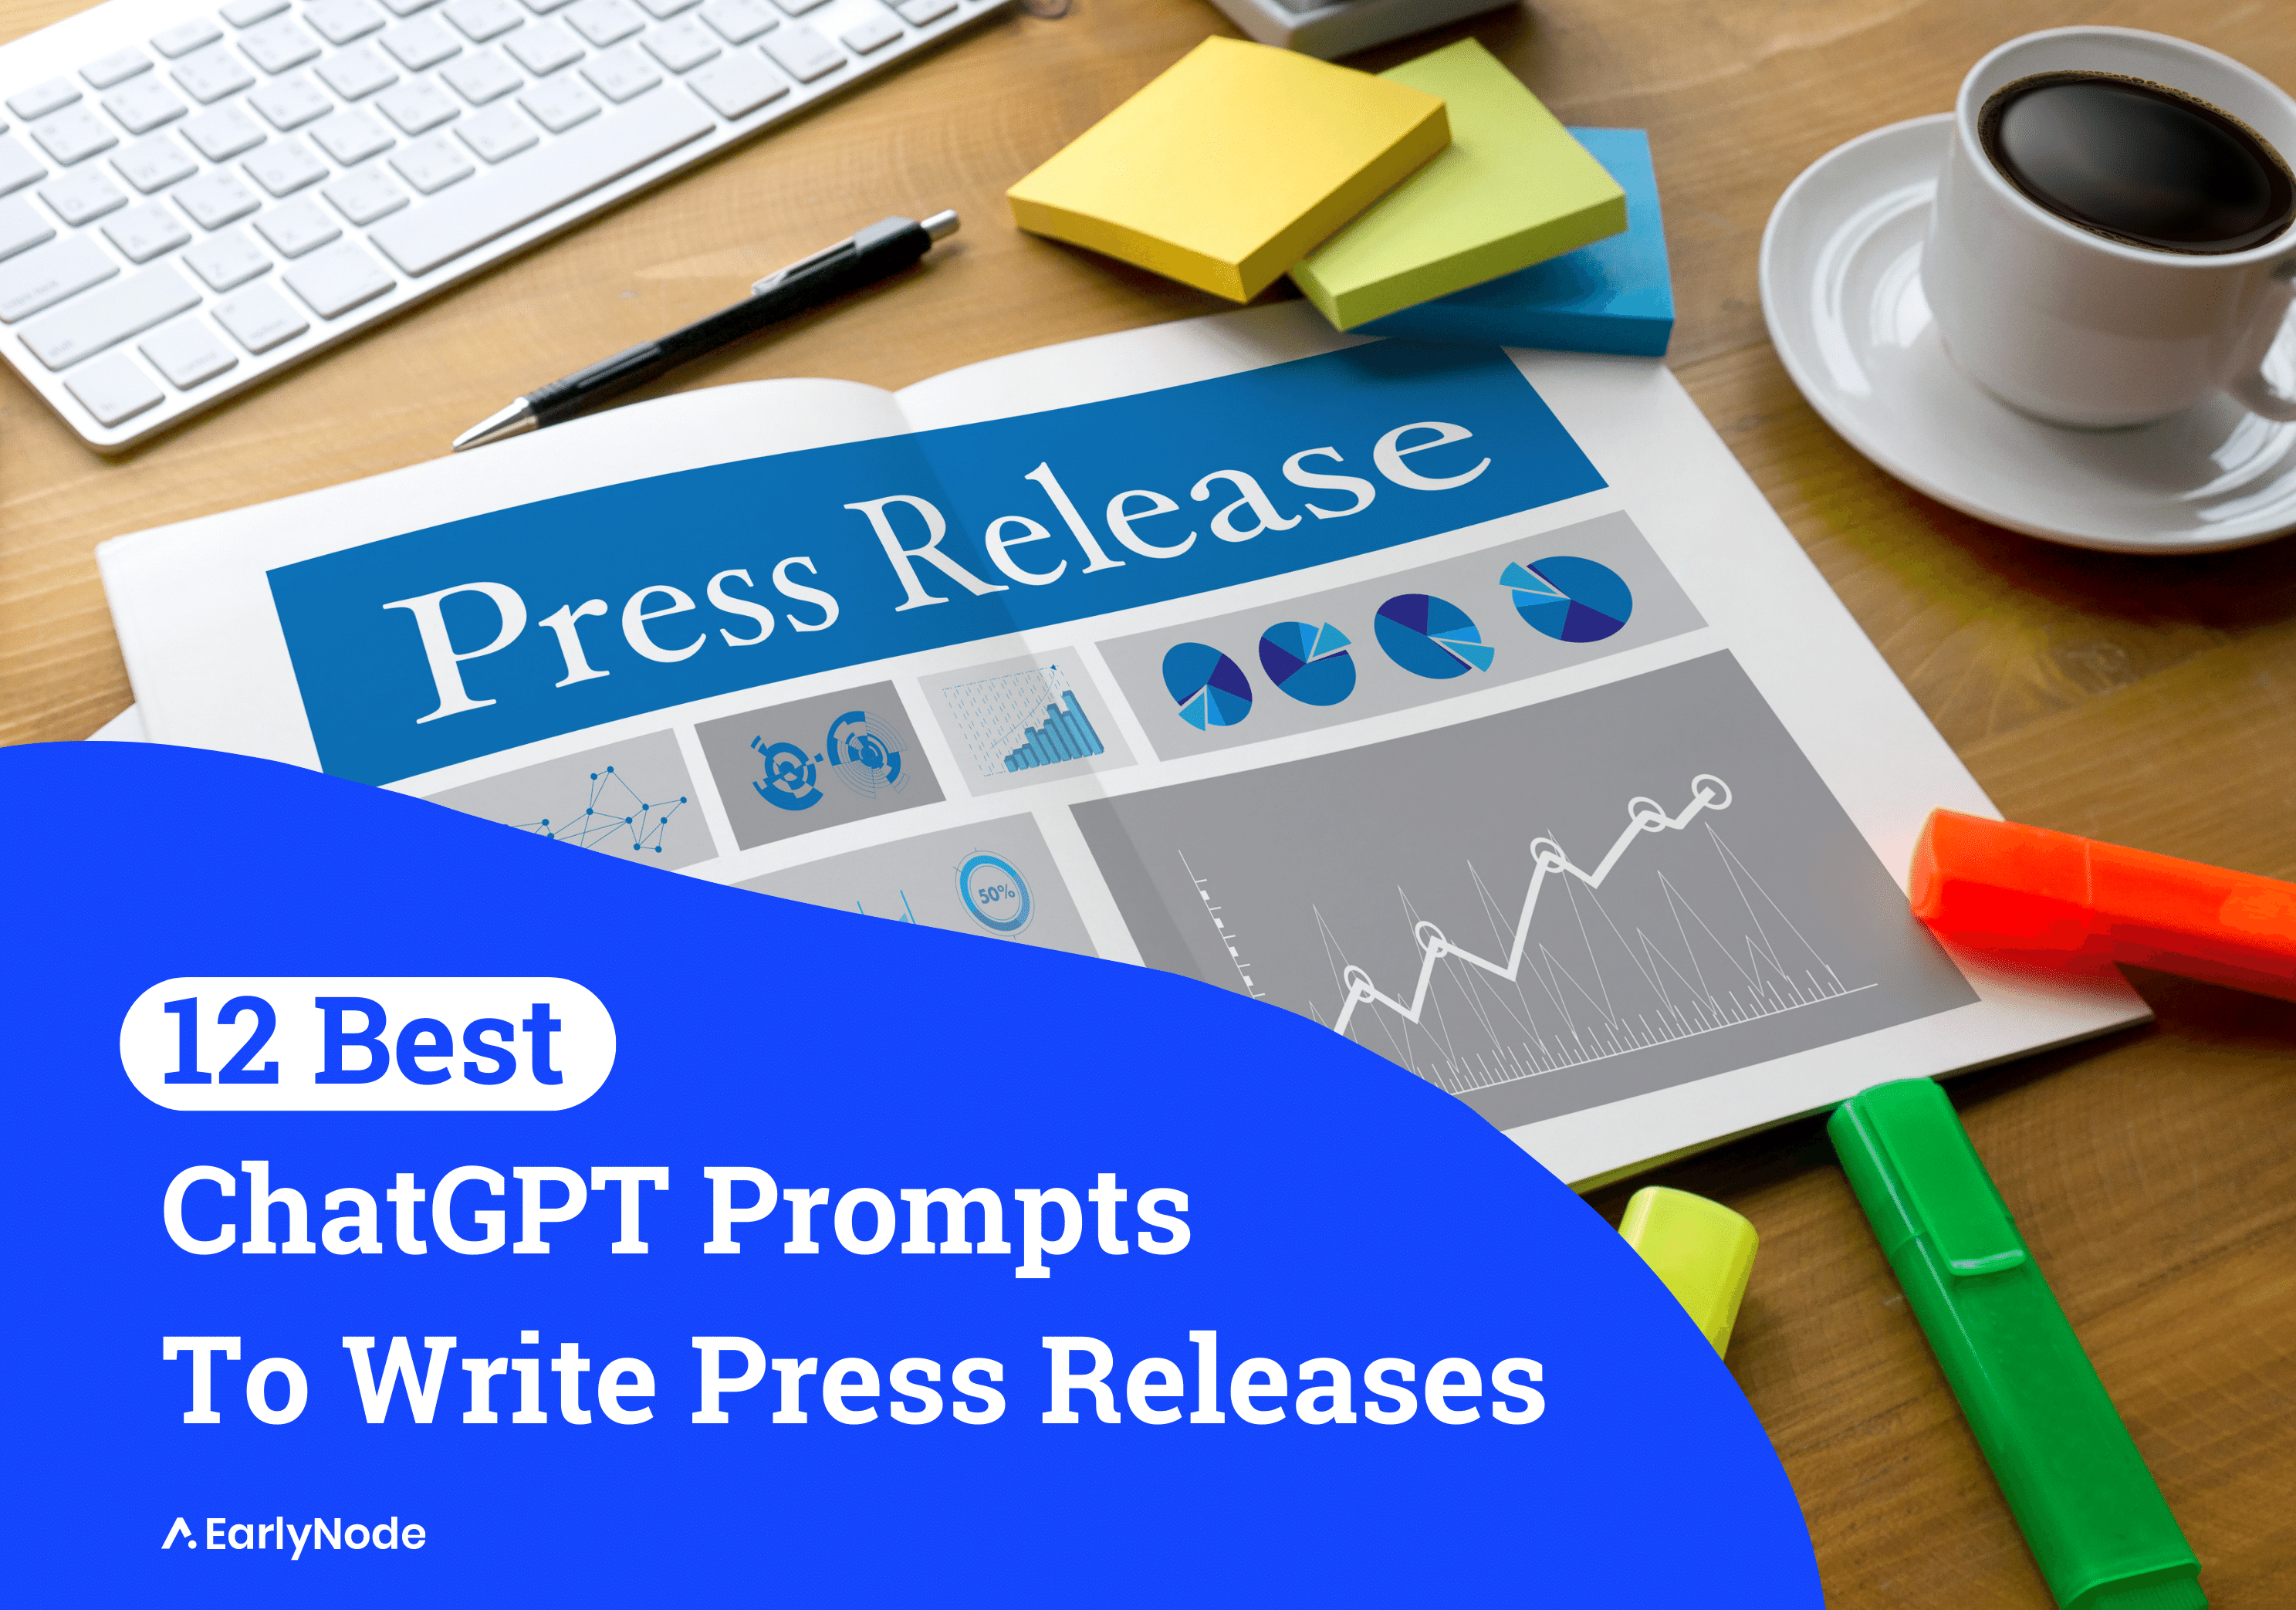 12 ChatGPT Prompts To Write Press Releases That Get Noticed